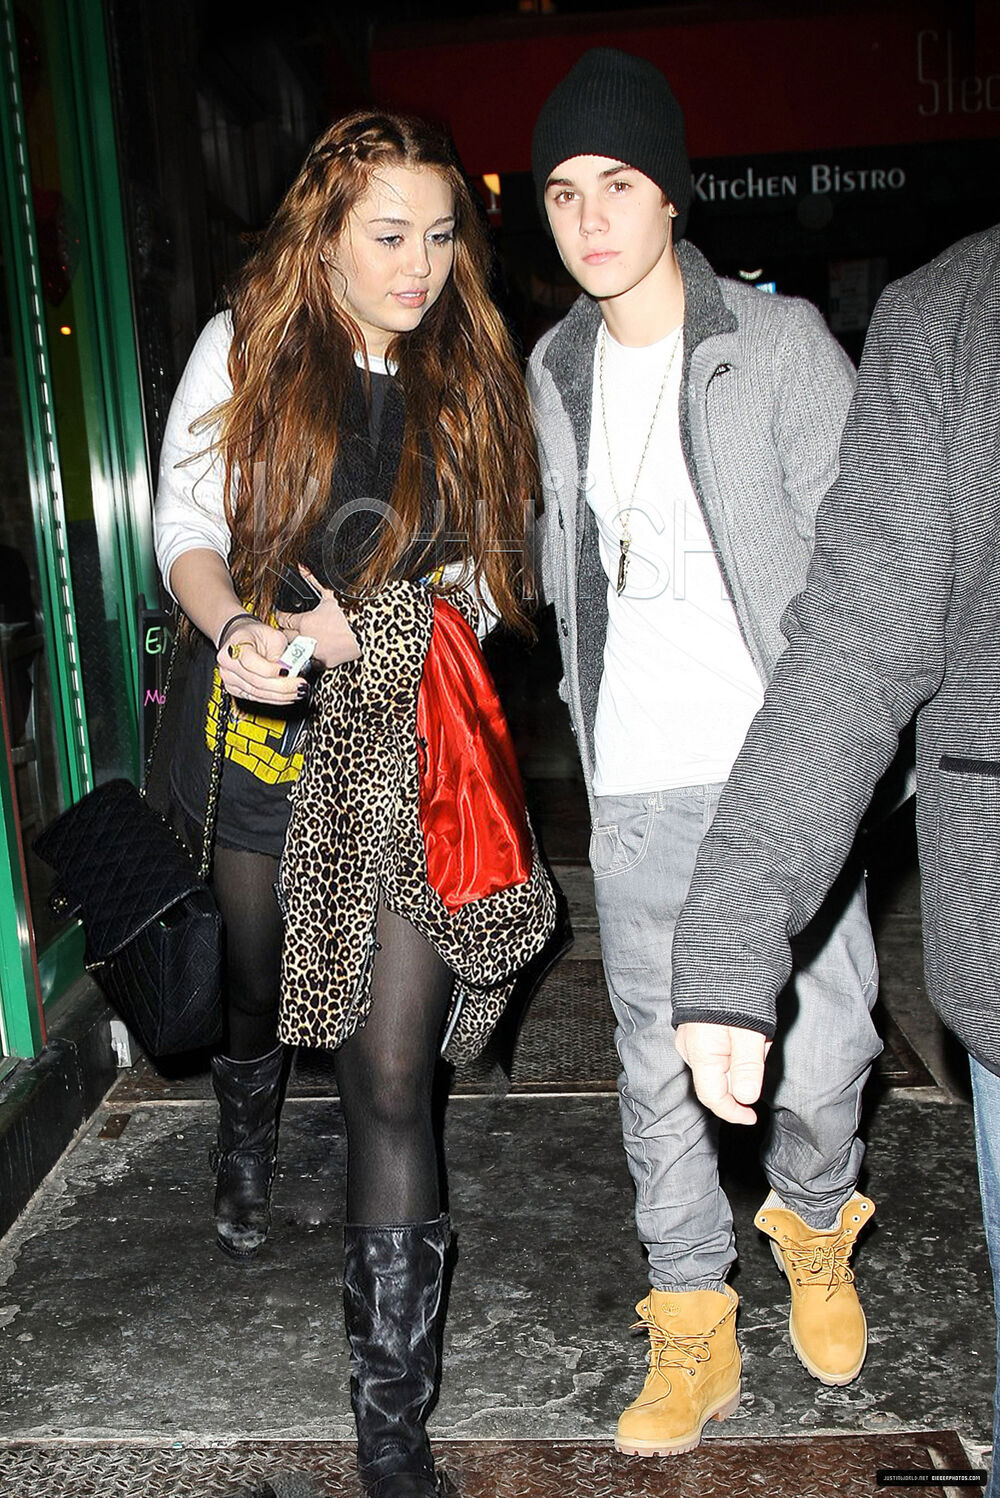 Justin Bieber and Miley Cyrus: Relationship Trivia!